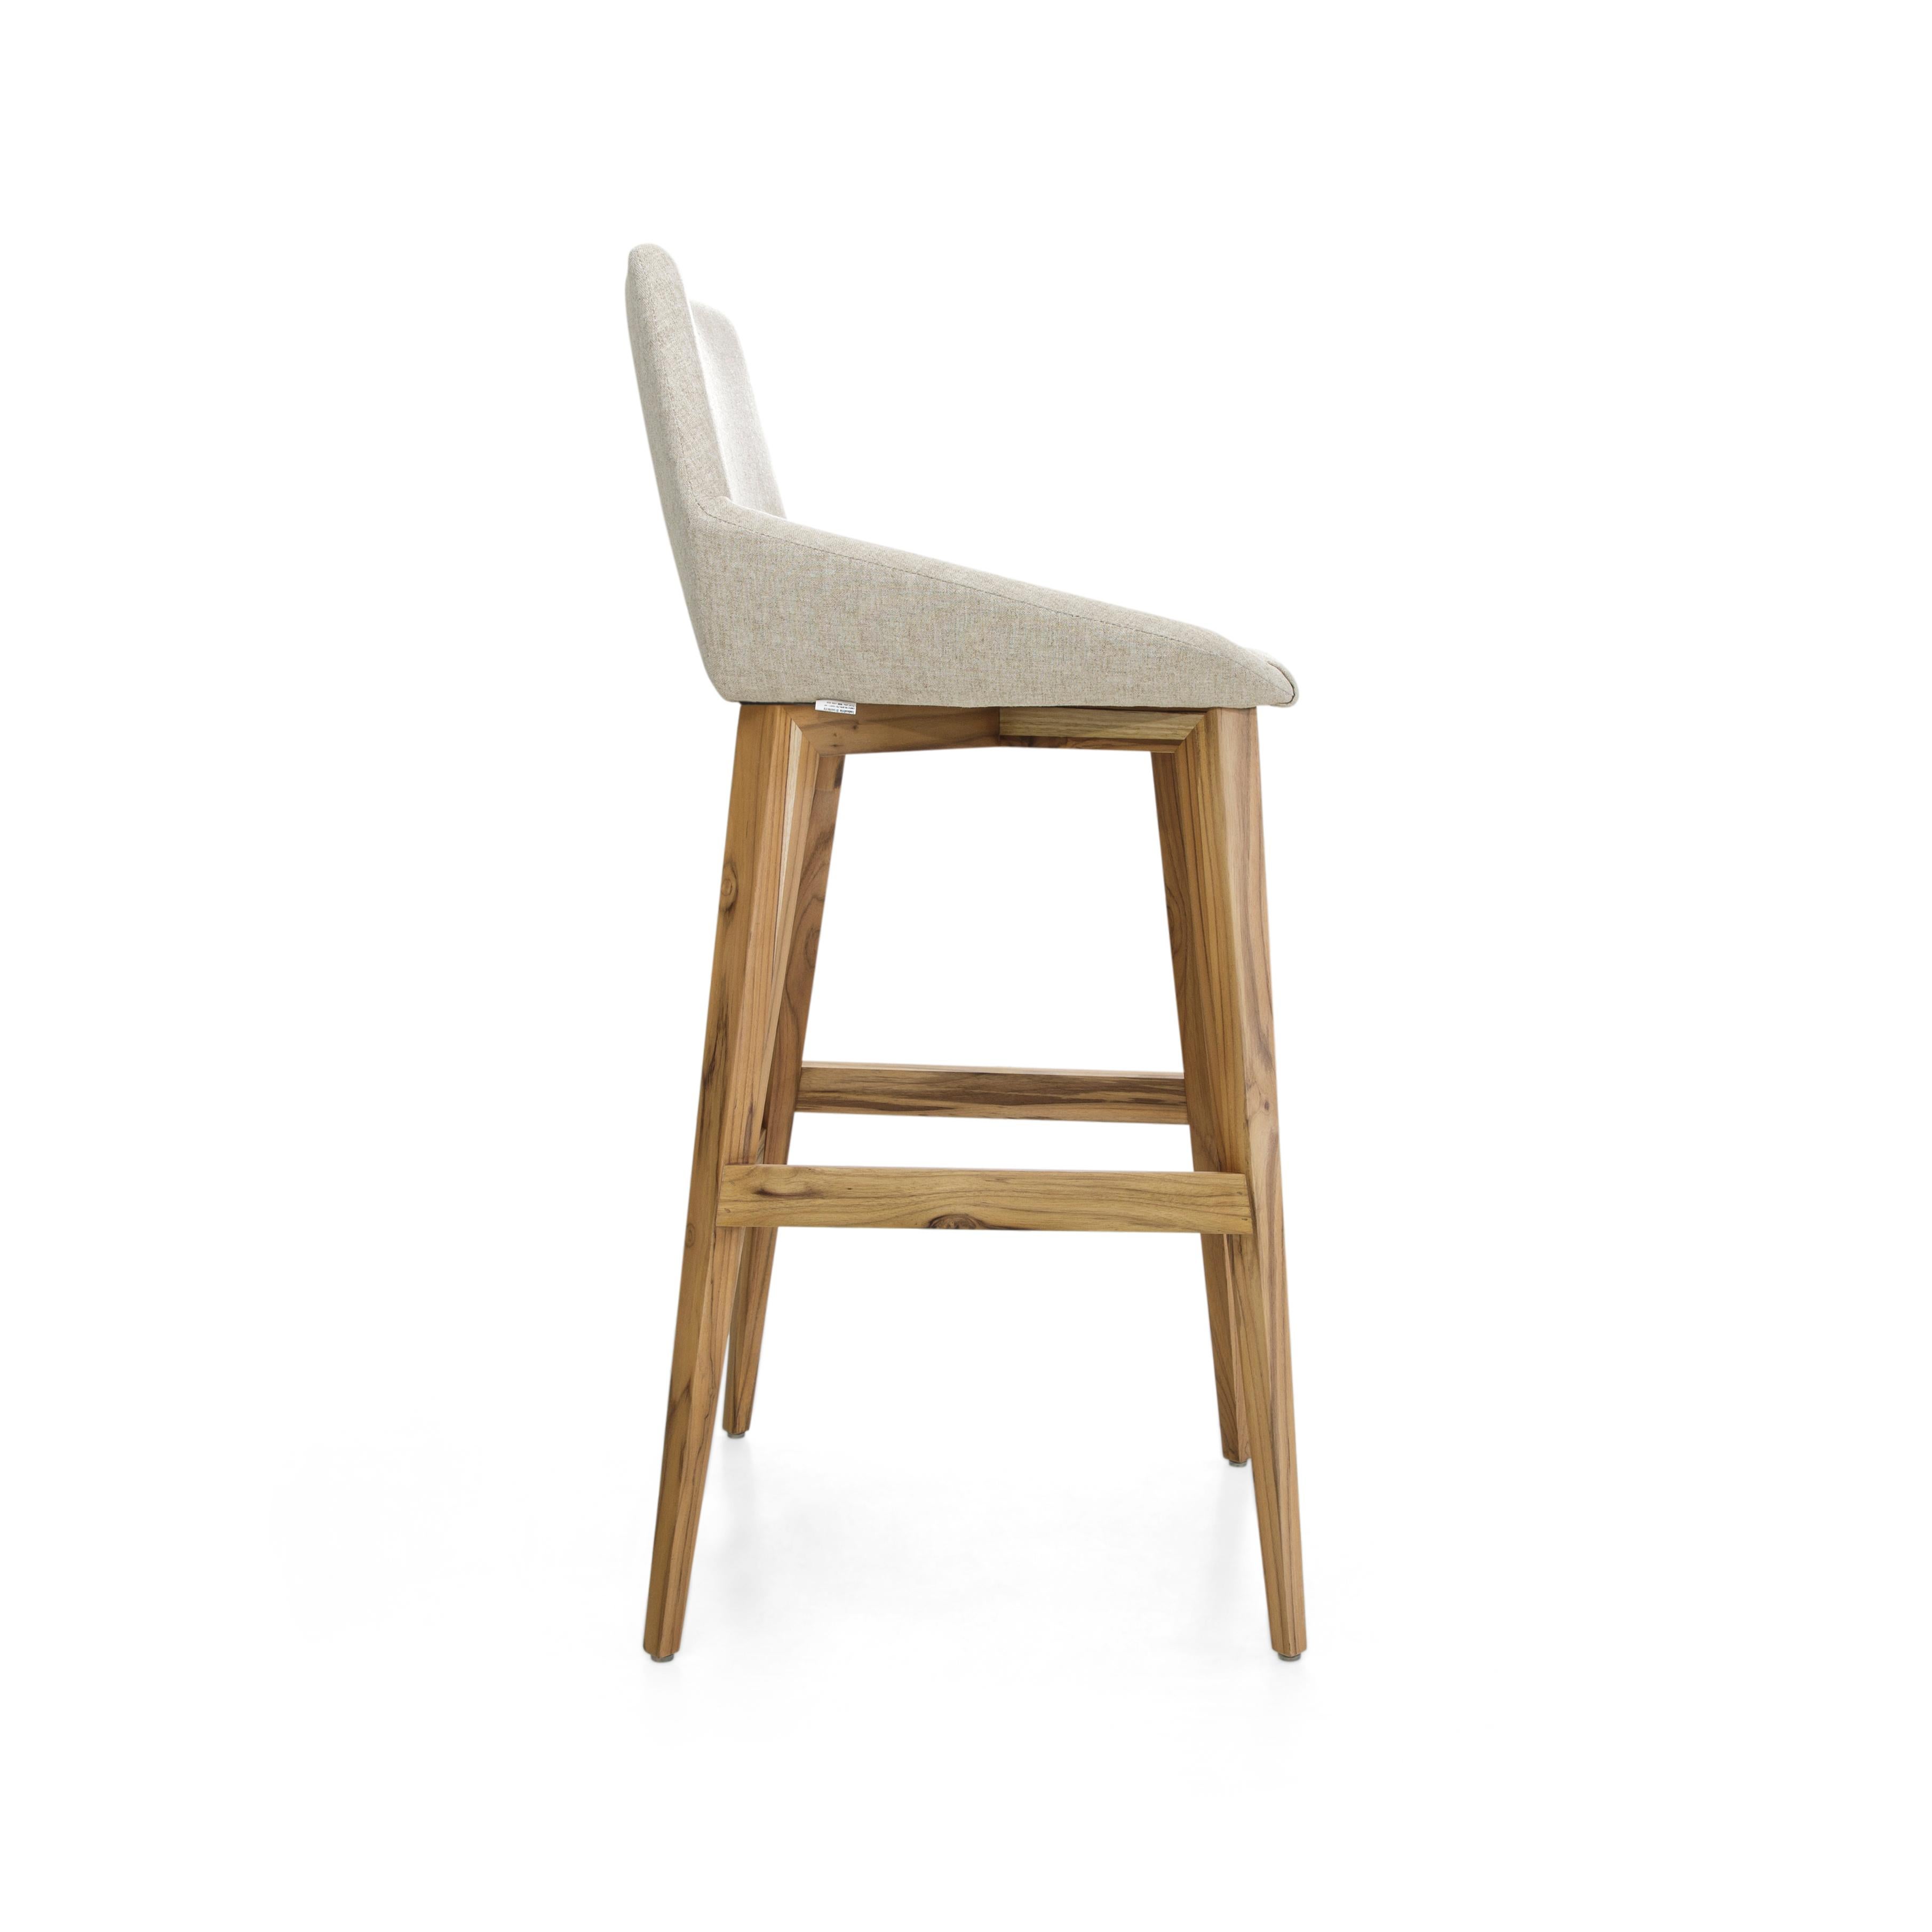 Geometric Cubi Bar Stool with Teak Wood Finish Base and Oatmeal Fabric Seat In New Condition For Sale In Miami, FL